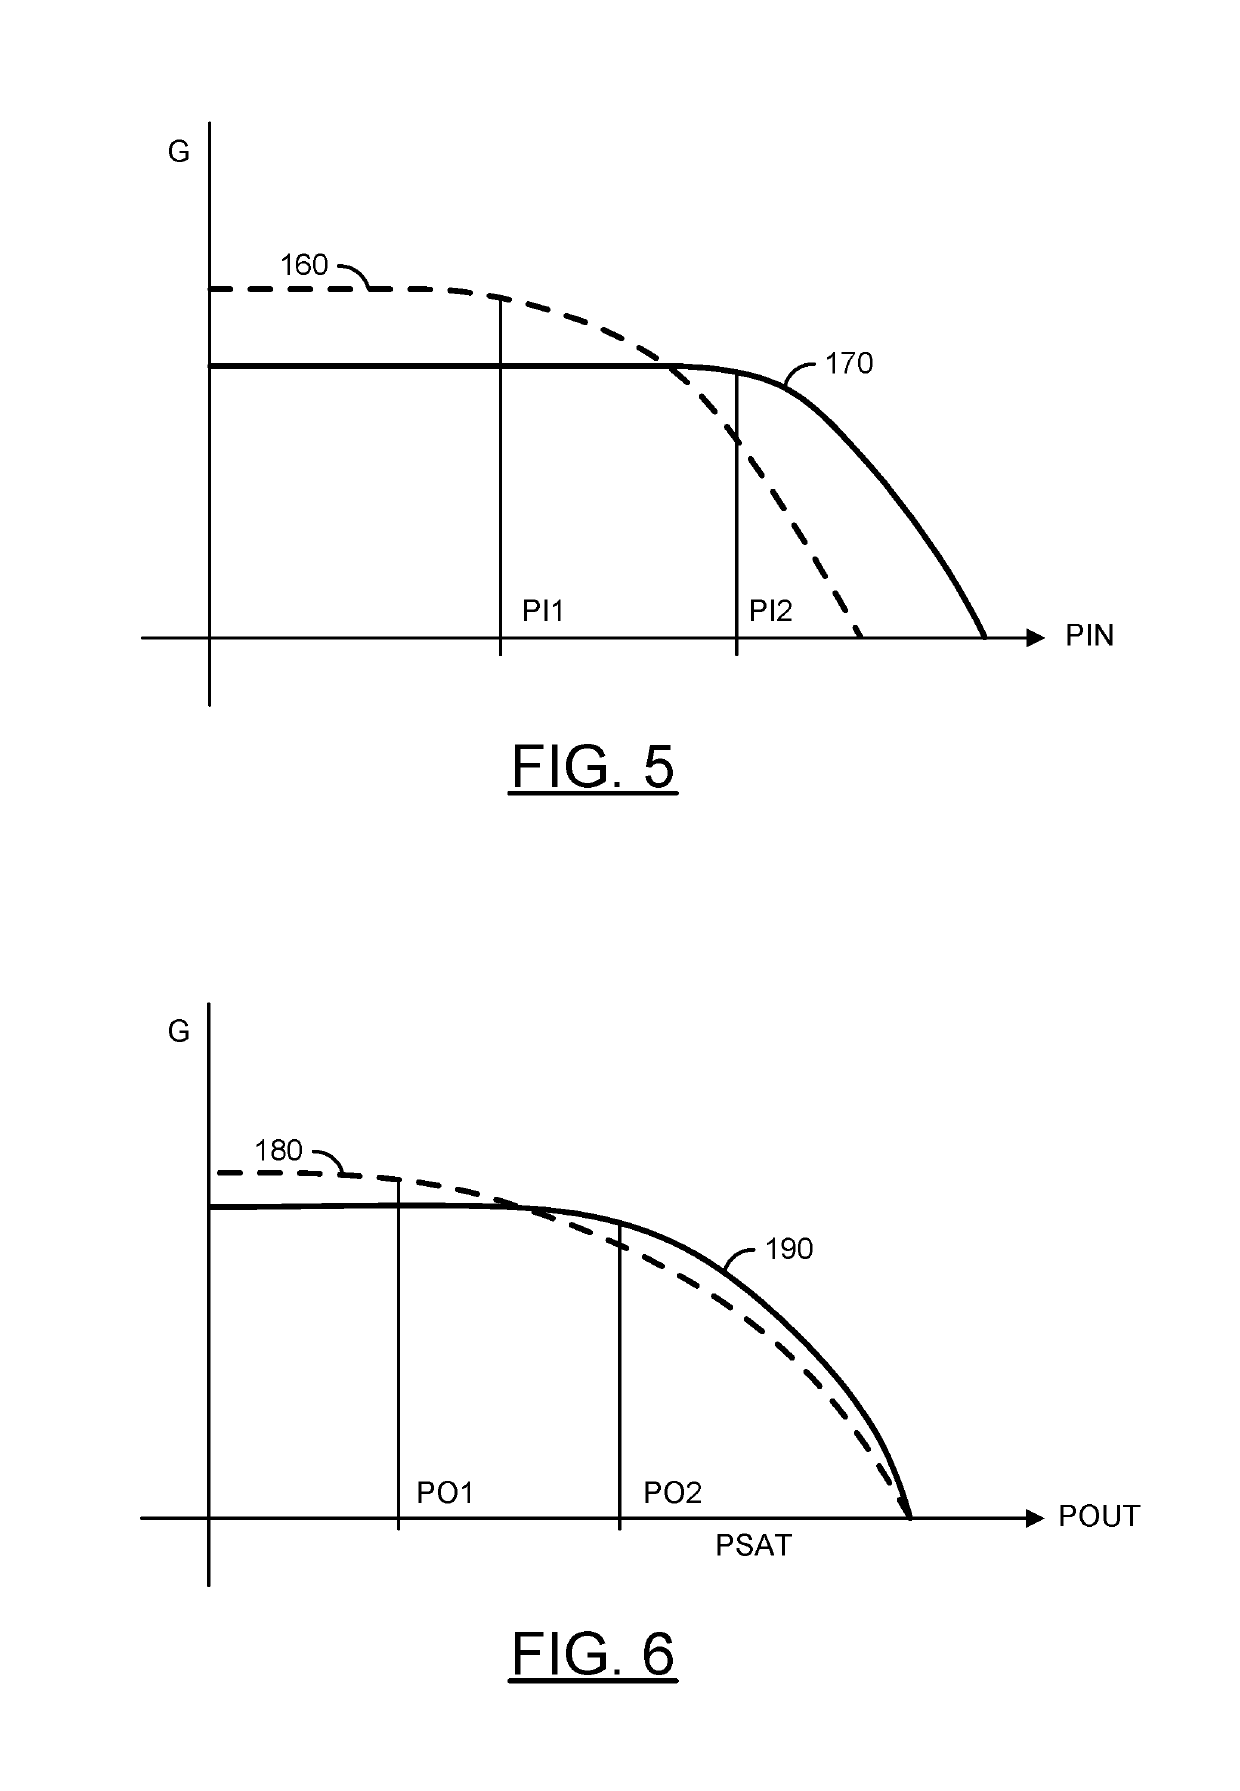 RF amplifier linearity enhancement with dynamically adjusted variable load